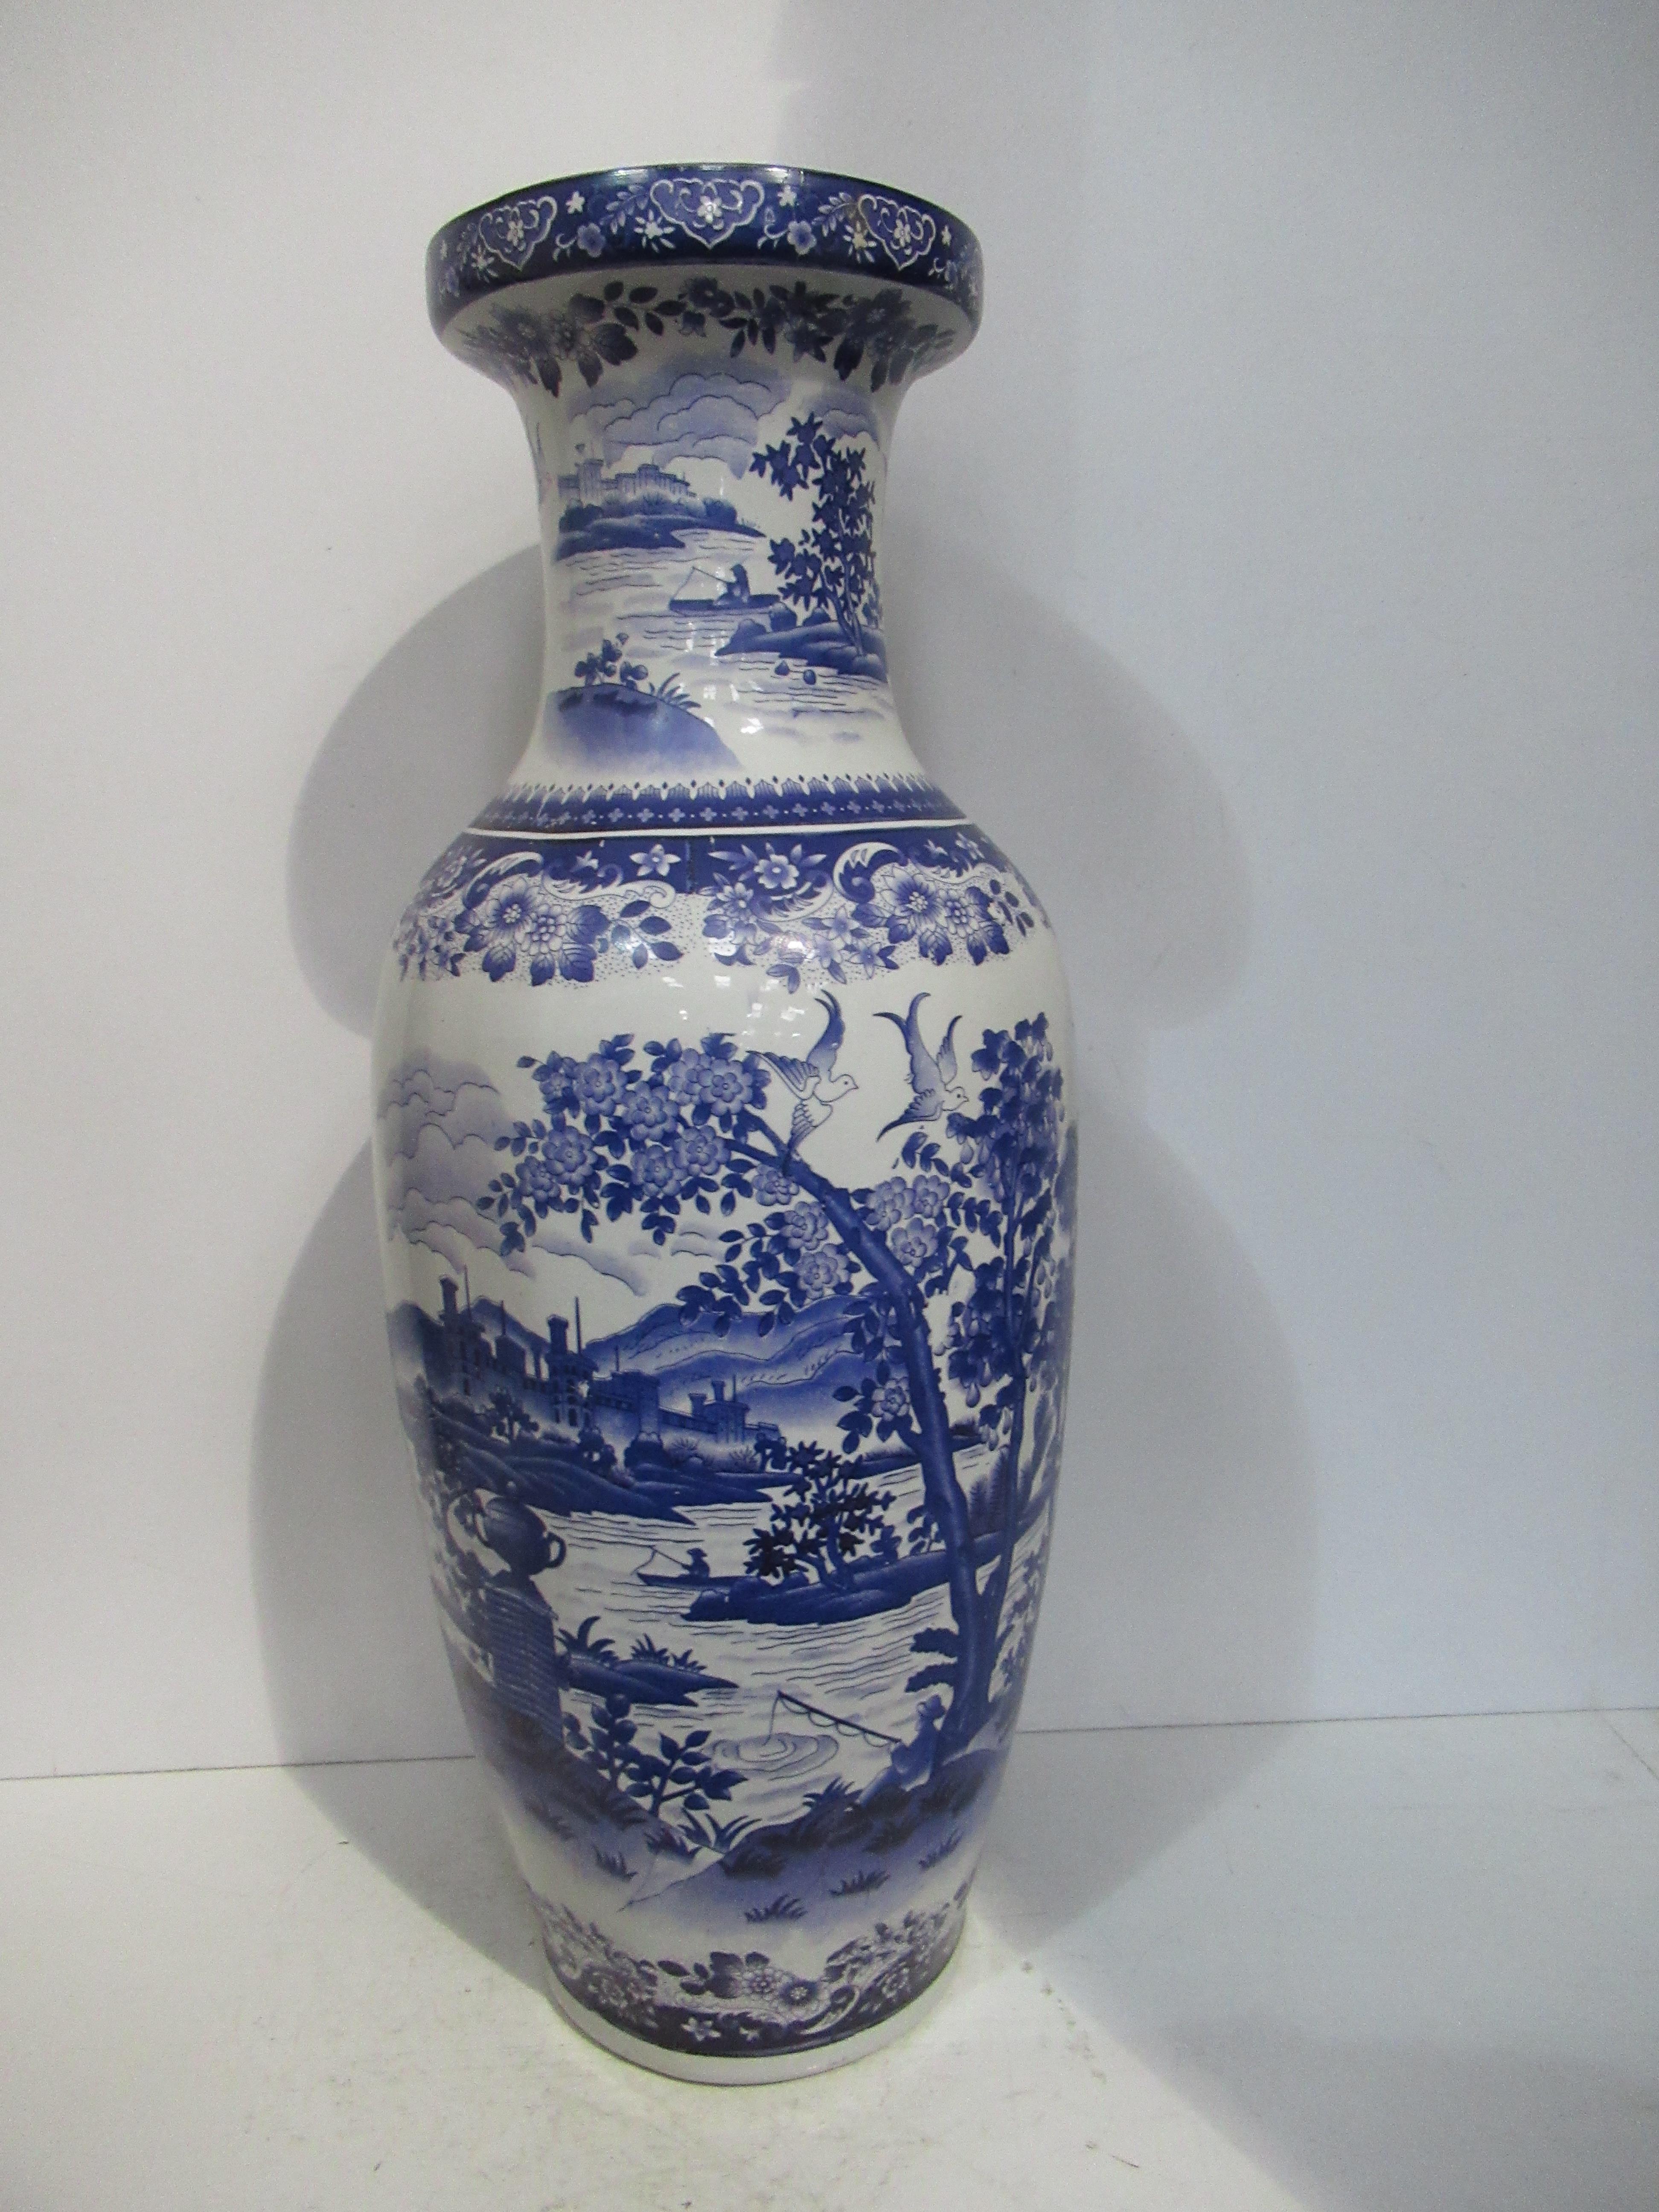 A Blue and White Japanese Vase (60cm Tall)